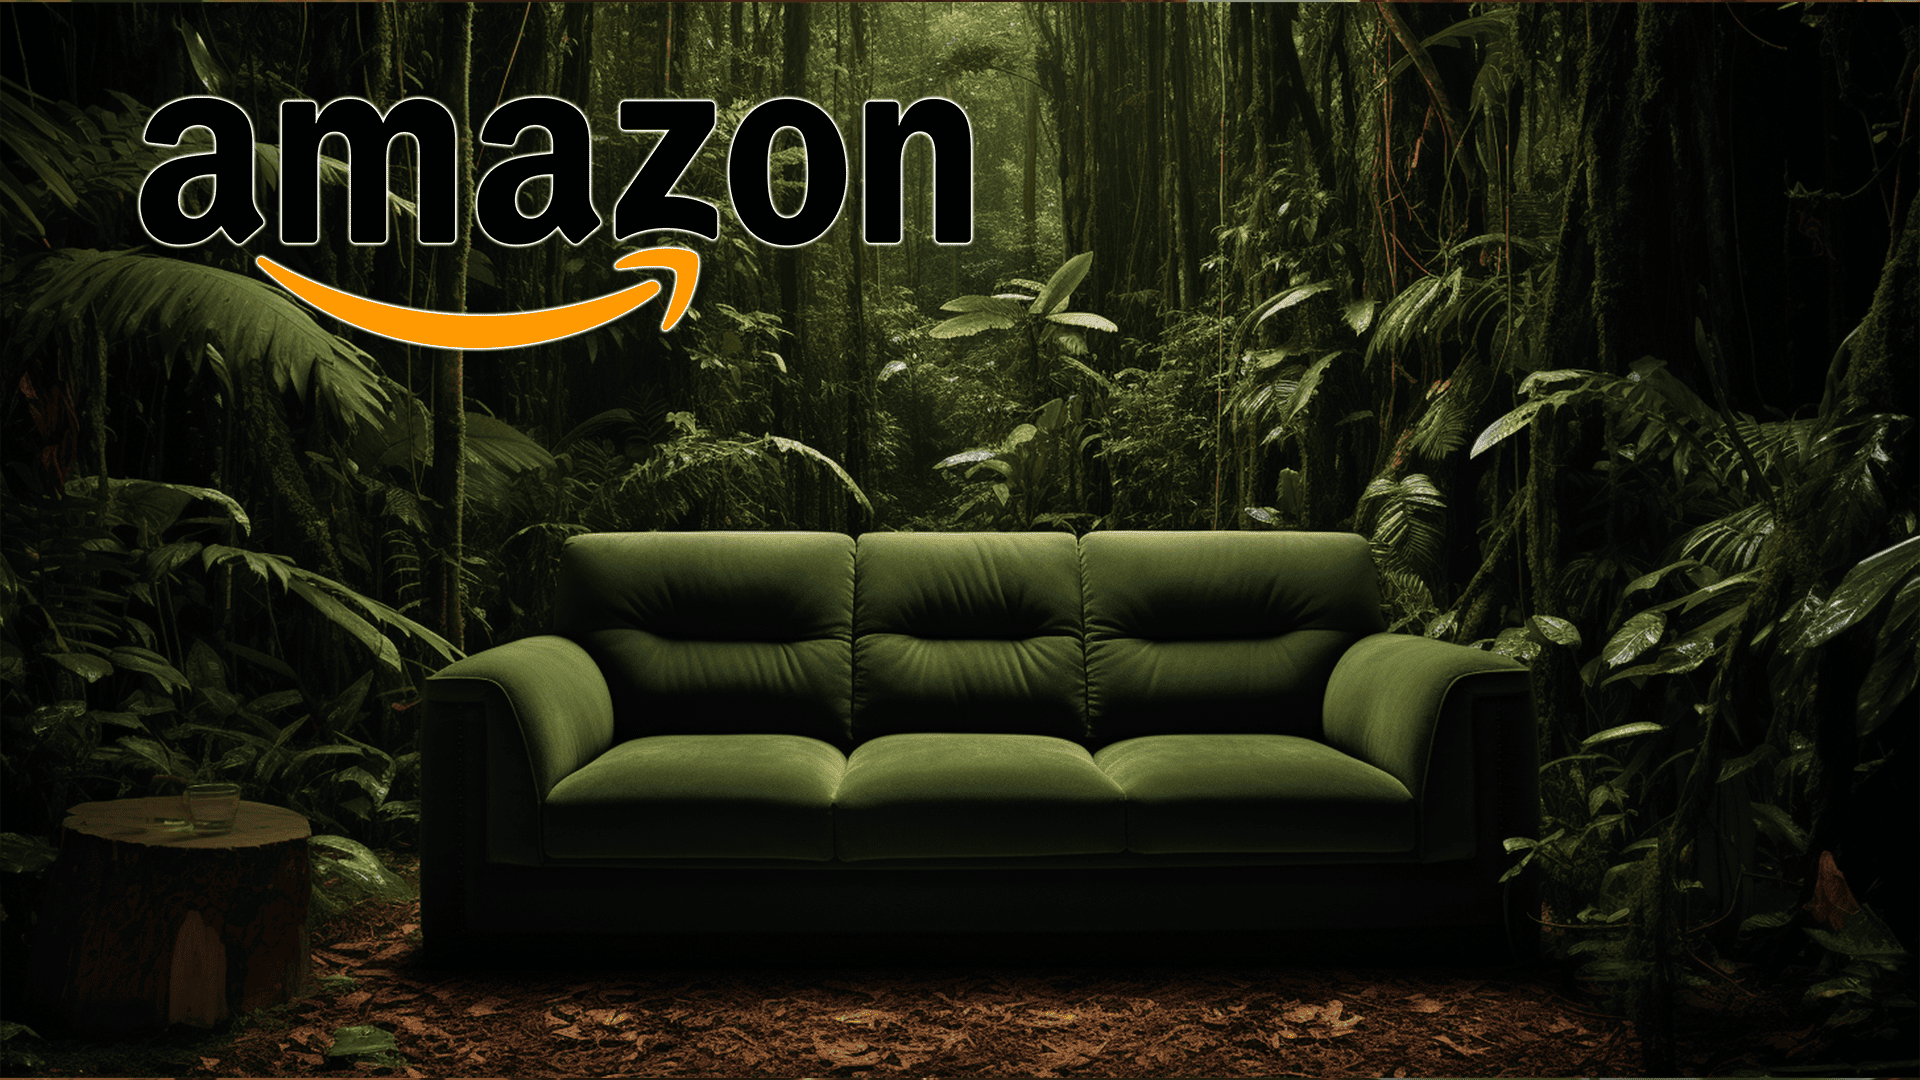 Amazon couch in the amazon rainforest with Amazon logo